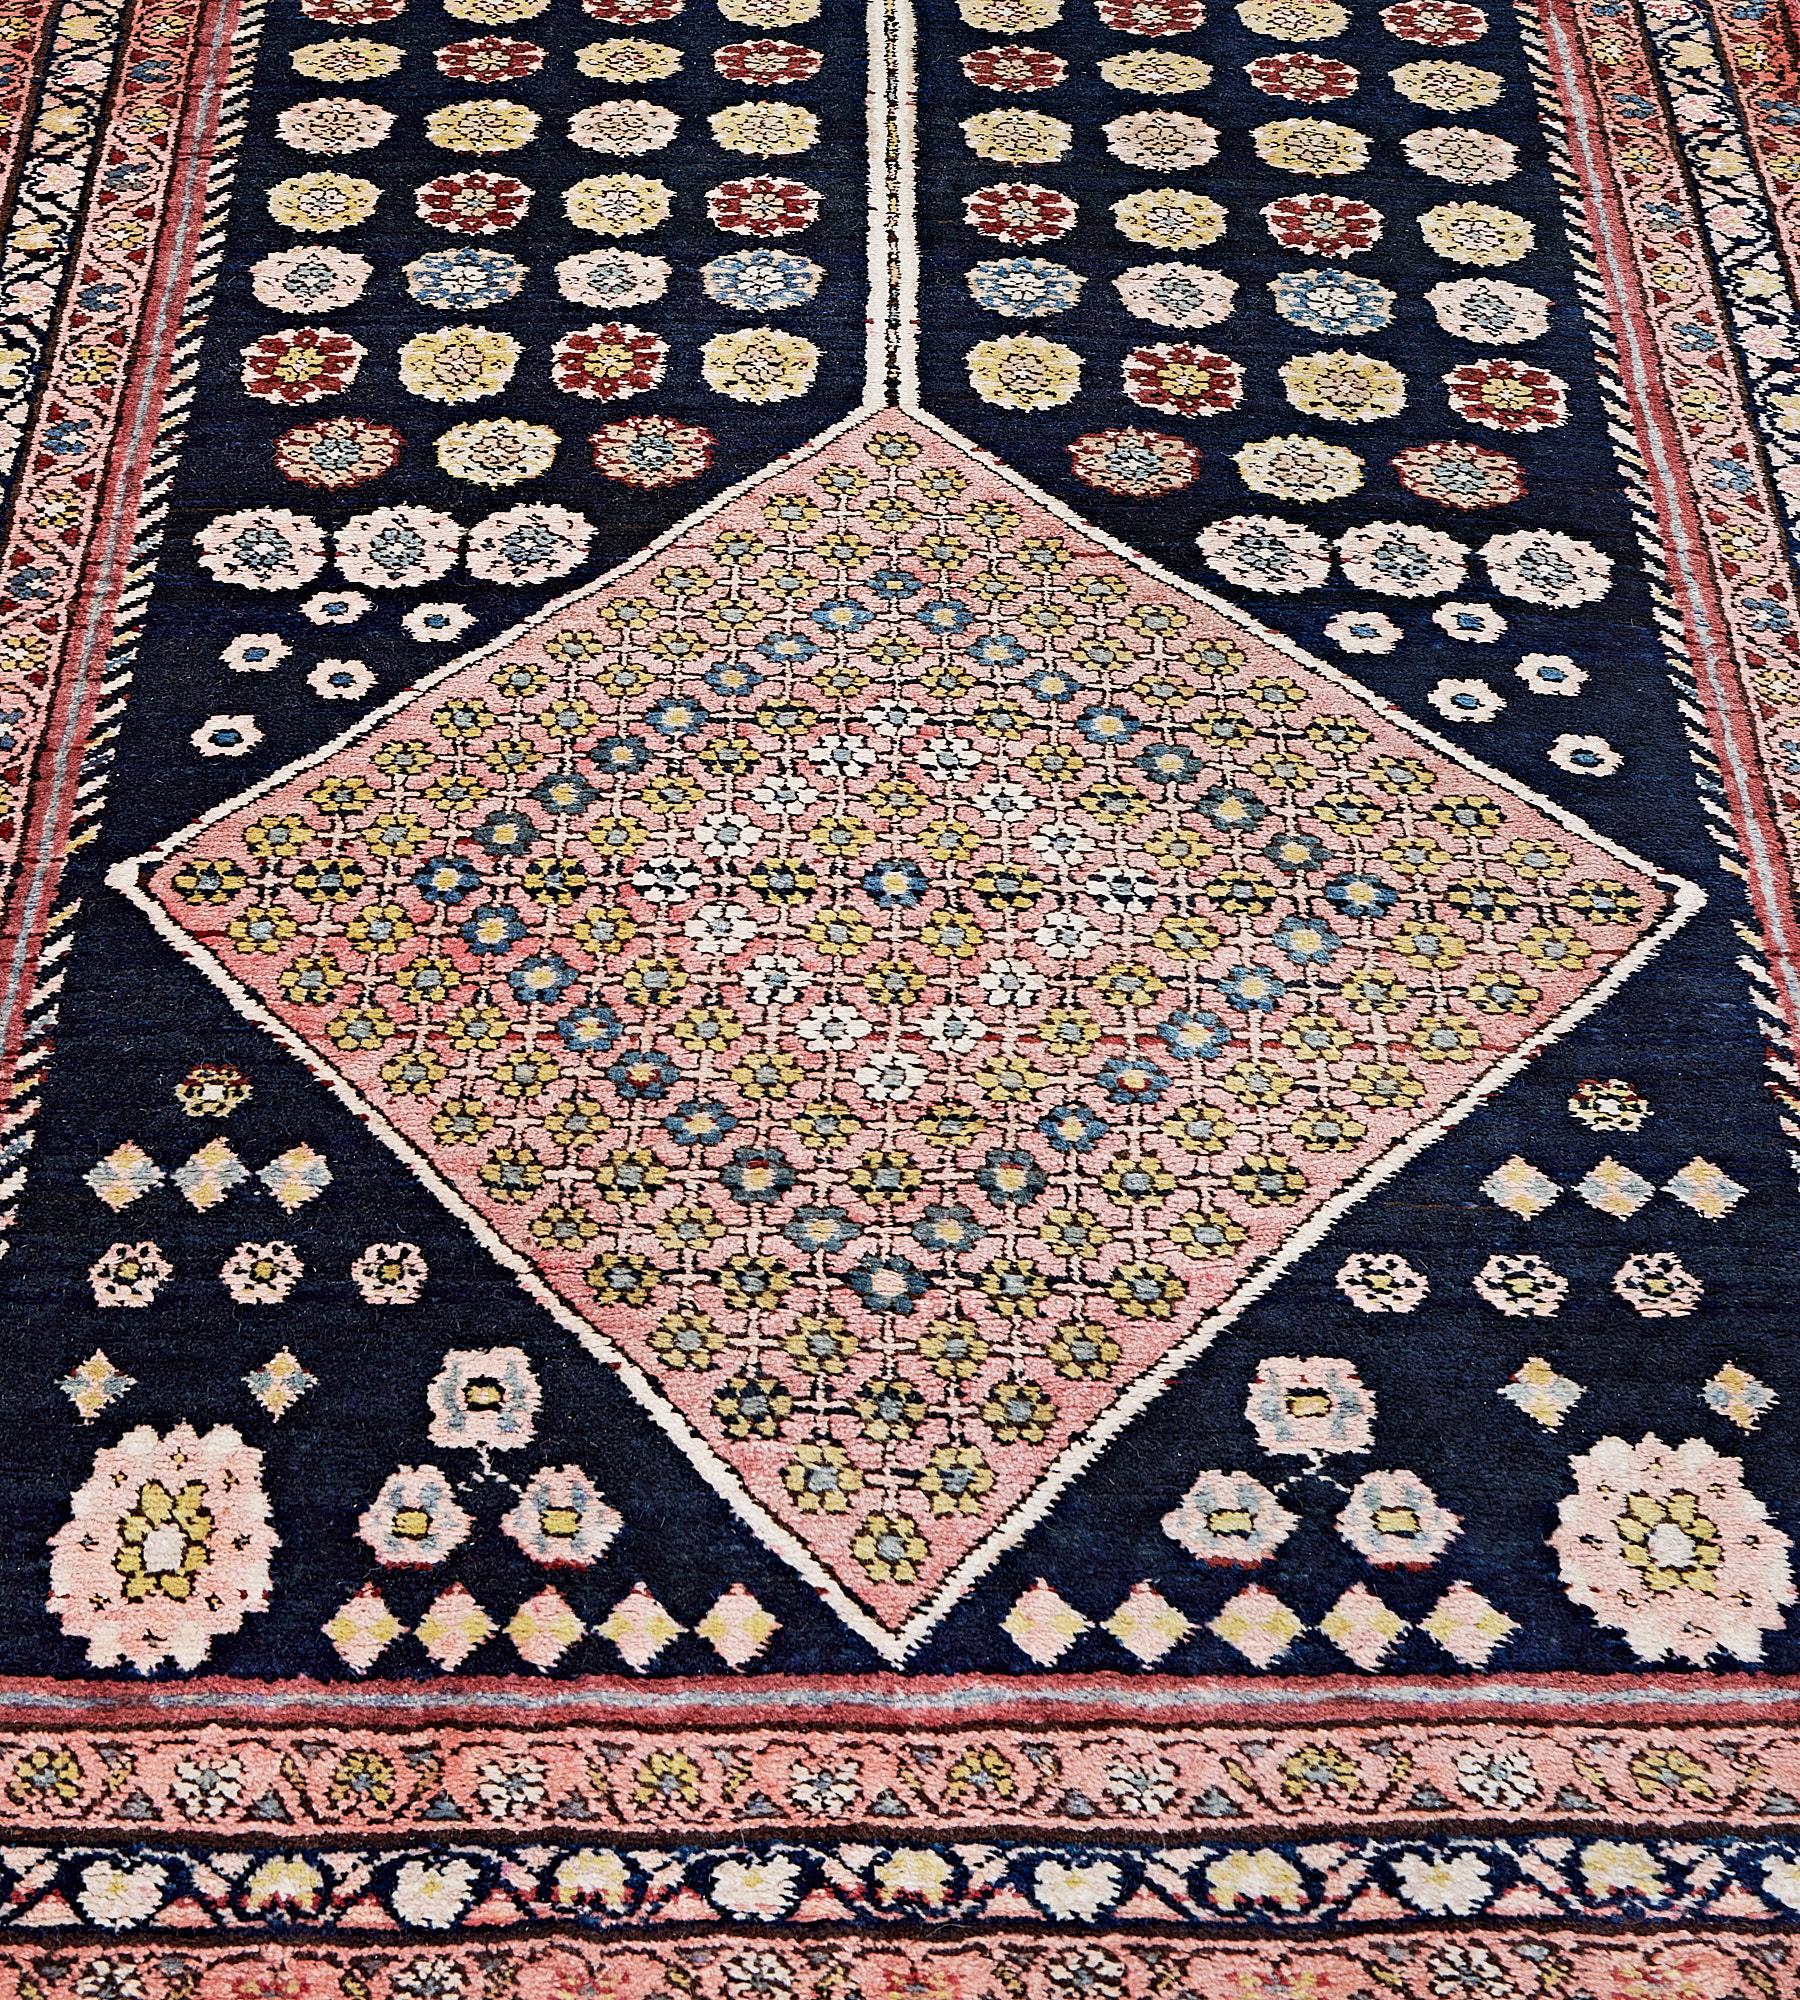 This antique, circa 1900, Bidjar Runner has an indigo-blue field with a central column of three large shaded pink linked lozenges each containing a dense flowerhead panel surrounded by scattered polychrome flowerheads and a pair of rabbits at each